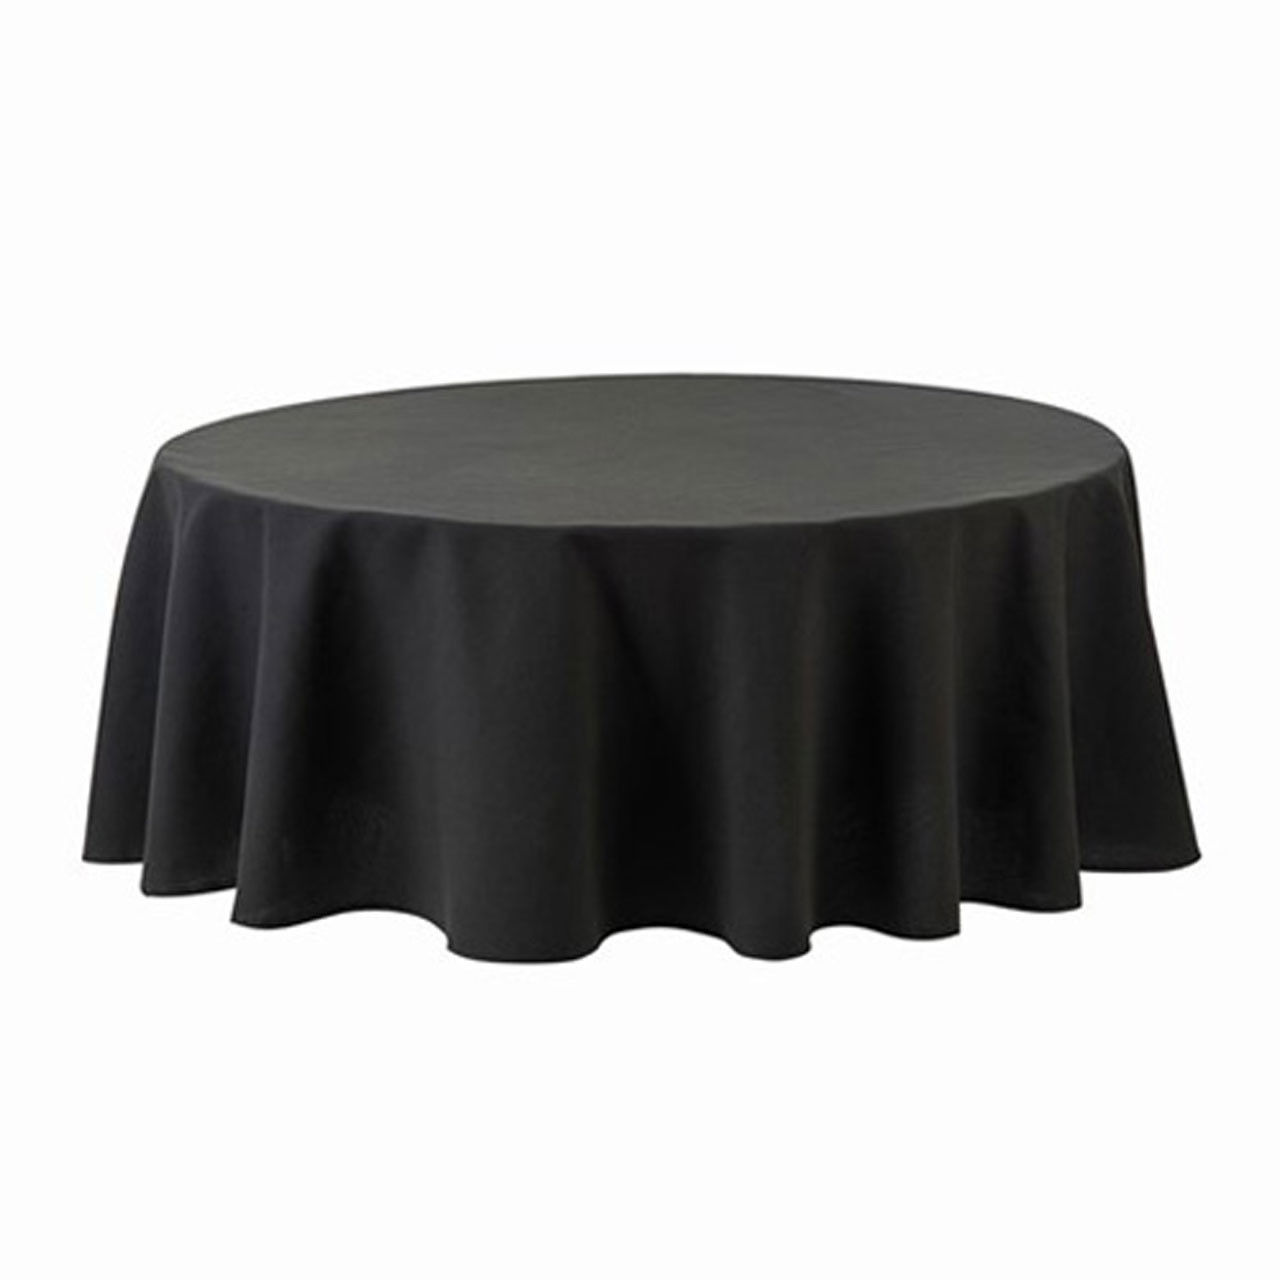 Is the sample I'll receive a black round tablecloth?